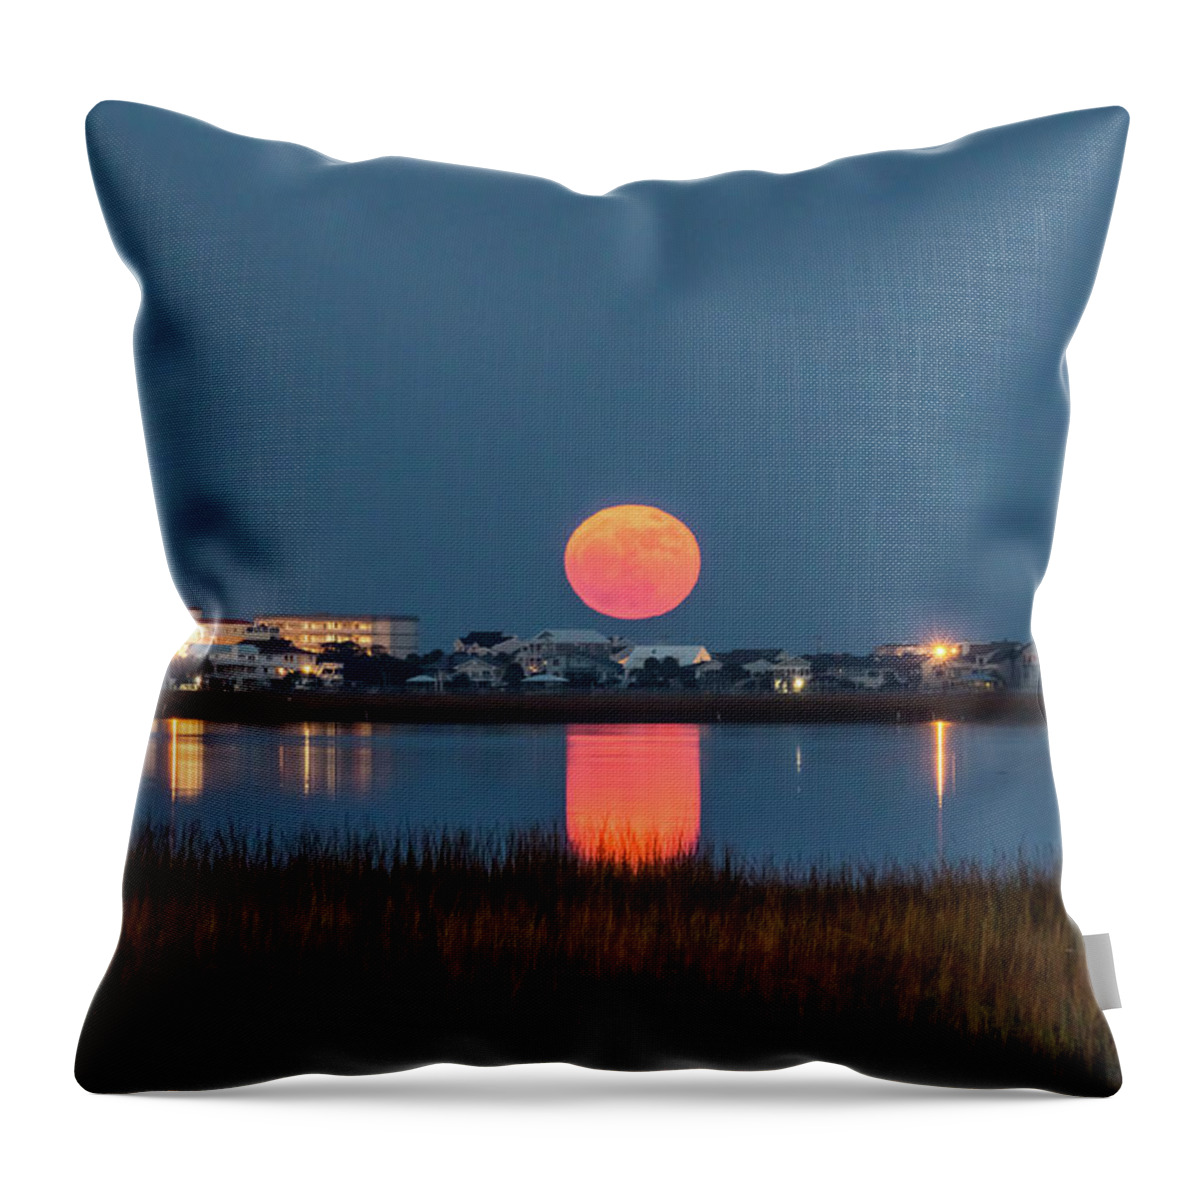 Supermoon Throw Pillow featuring the photograph 2017 Supermoon by Francis Trudeau